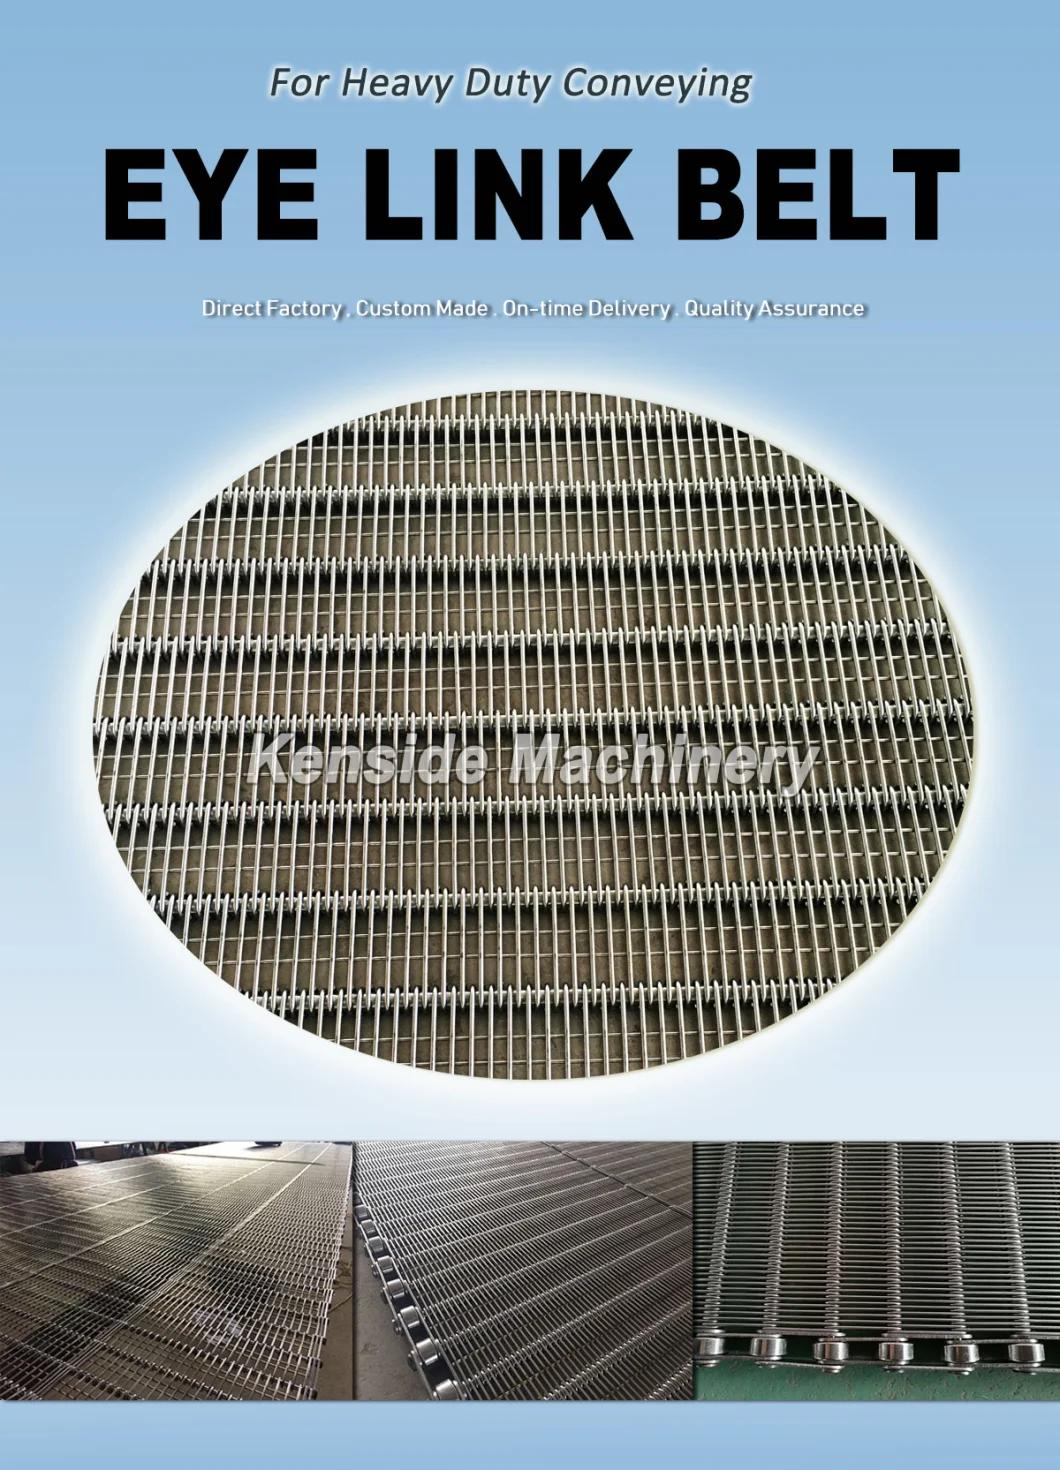 Stainless Steel Eye Link Belt for Drying and Pasteurizing Industry